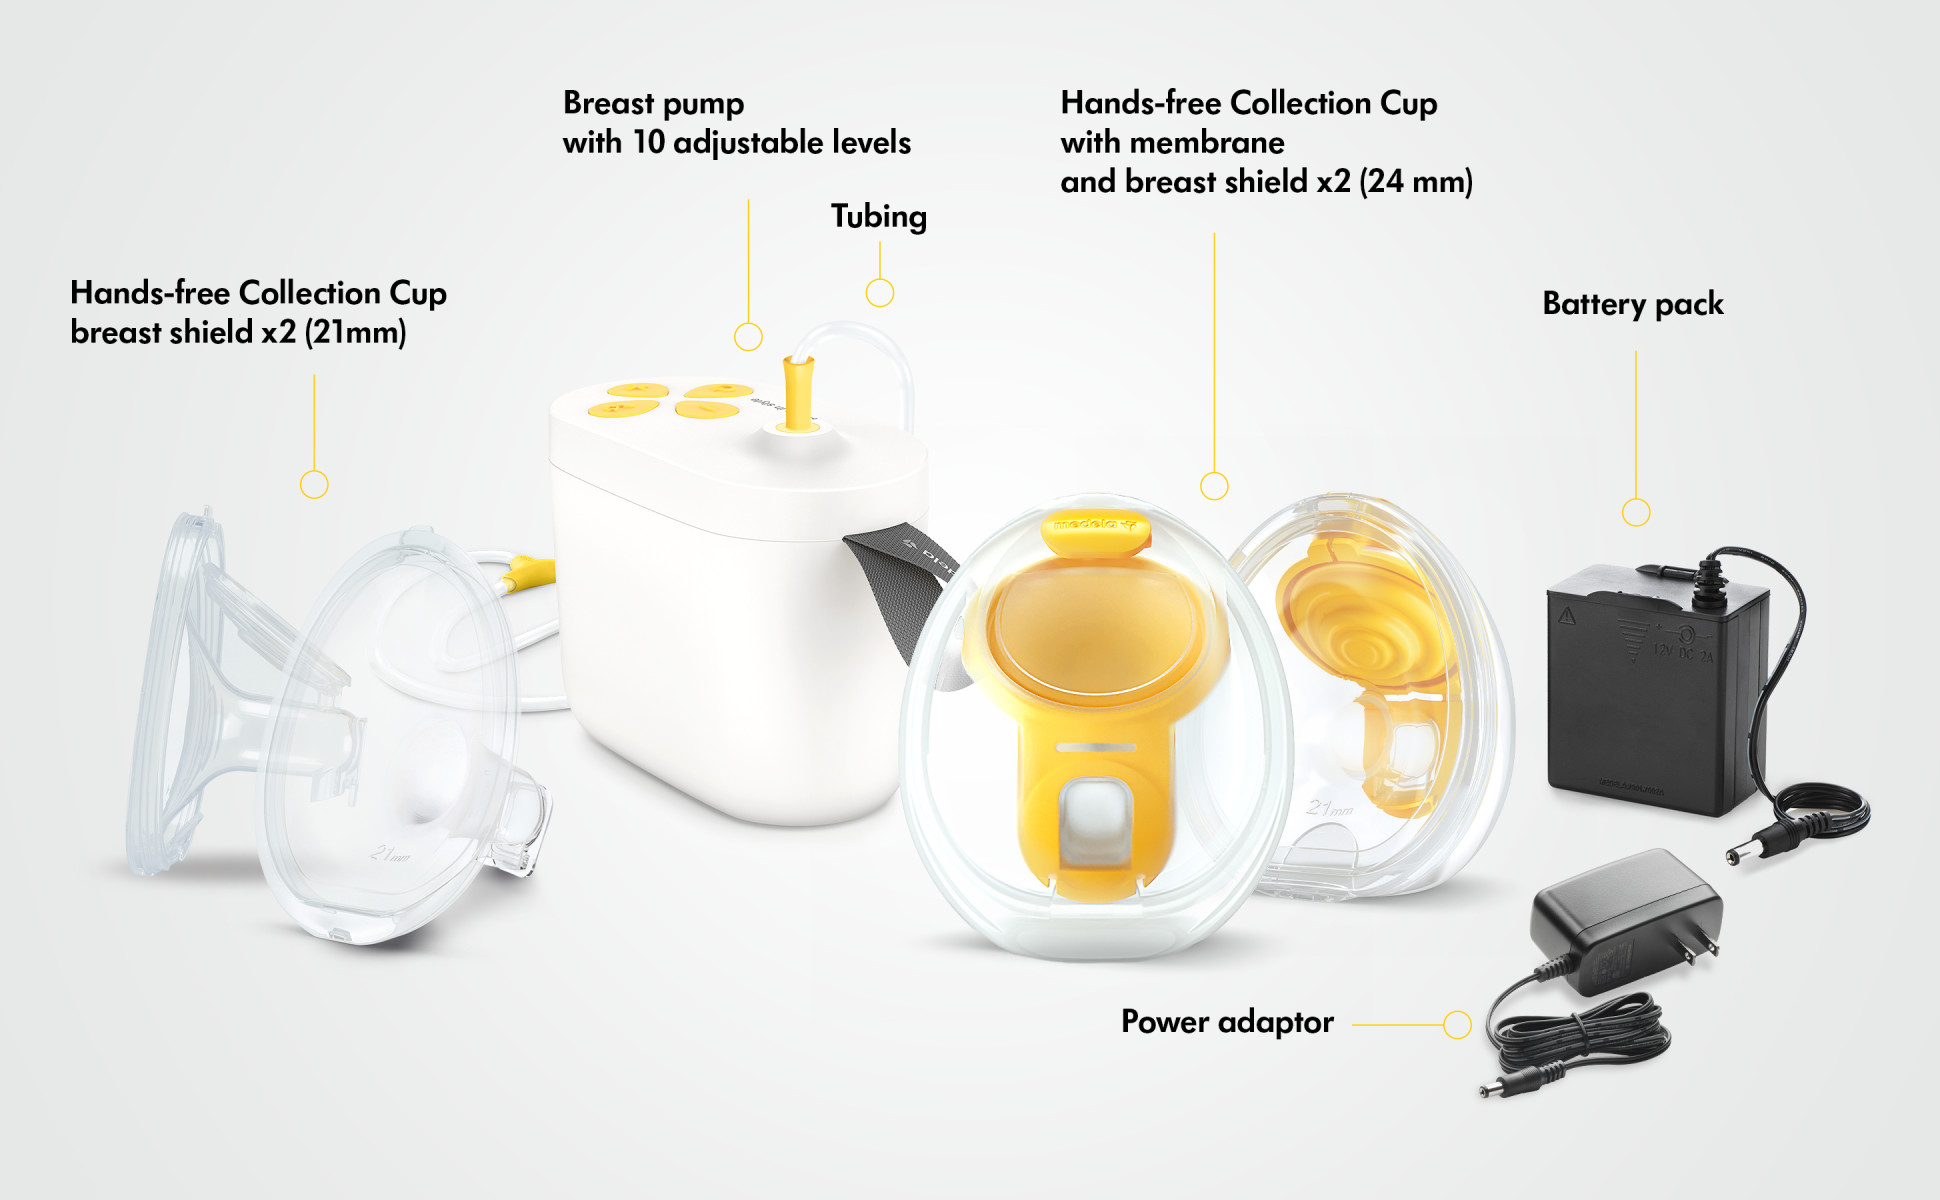 Medela Pump in Style Hands Free Breast Pump Complete Kit, Double